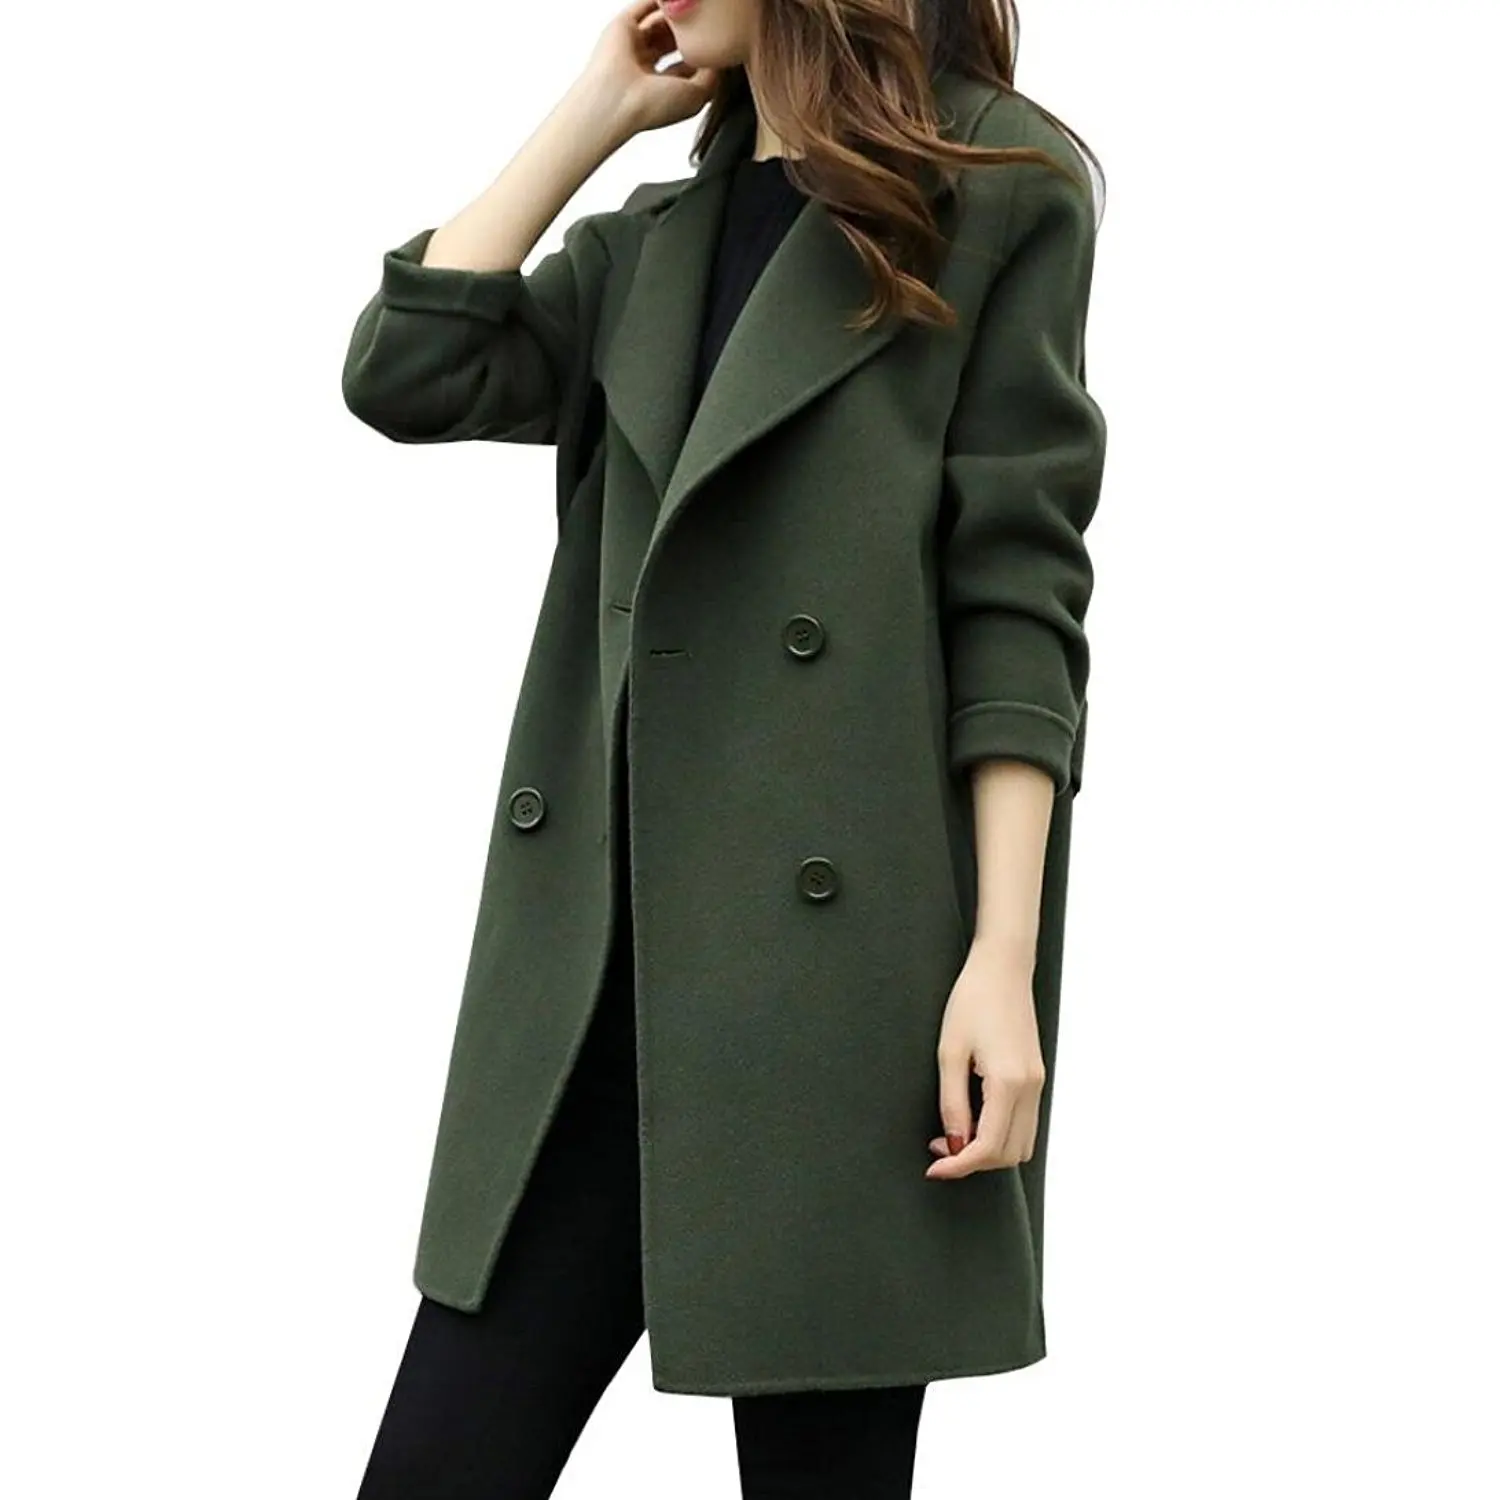 Cheap Double Breasted Wool Pea Coat Women, find Double Breasted Wool